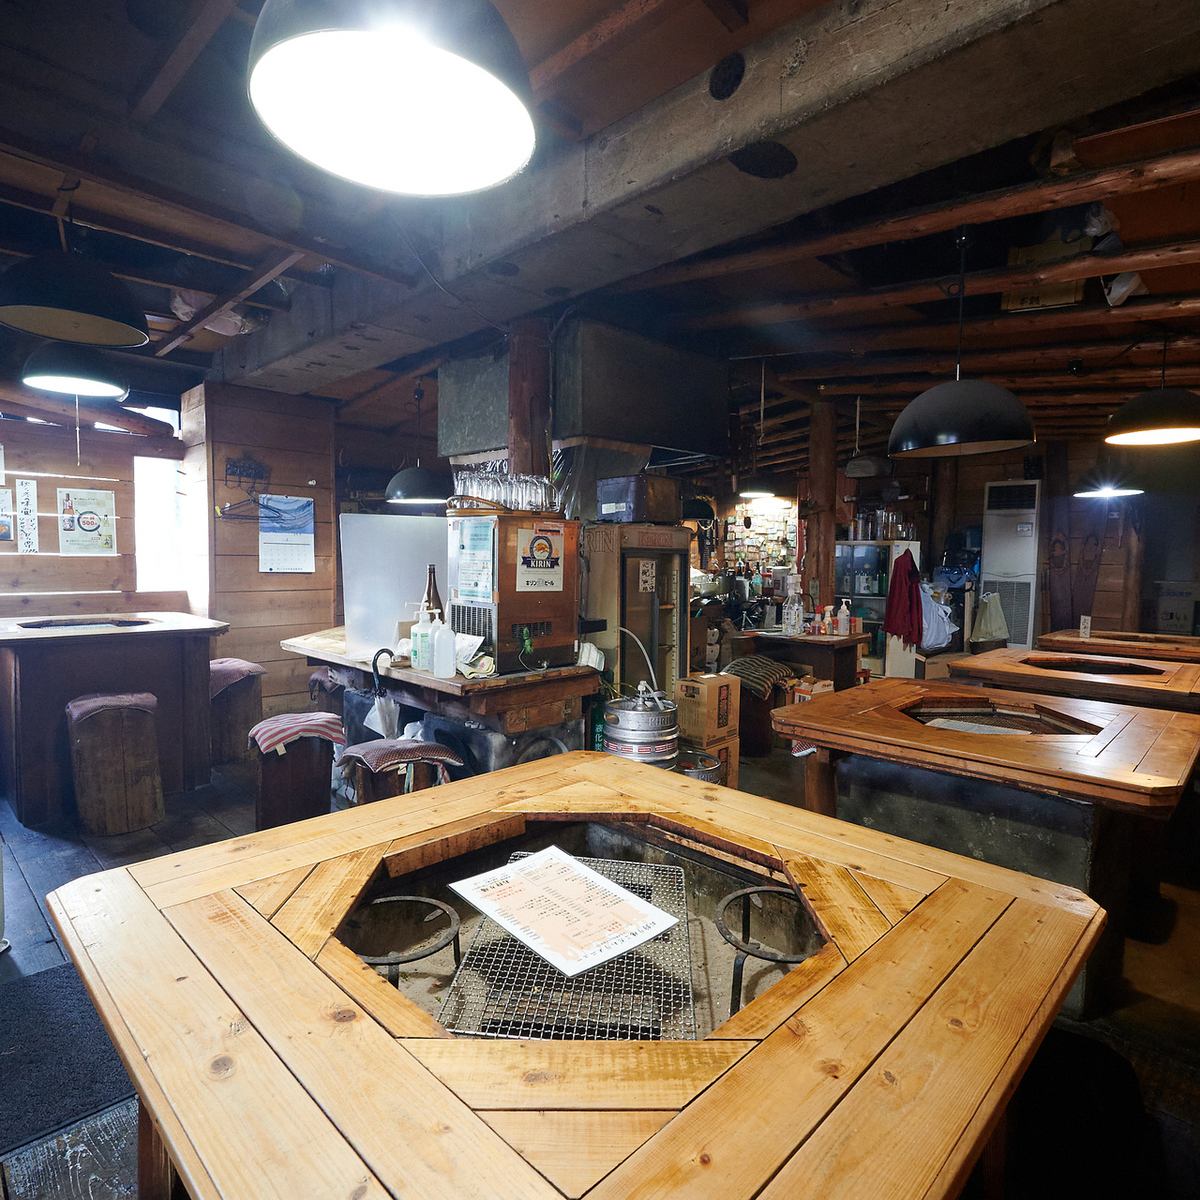 We can accommodate parties of up to 40 people! Enjoy your time around the hearth.